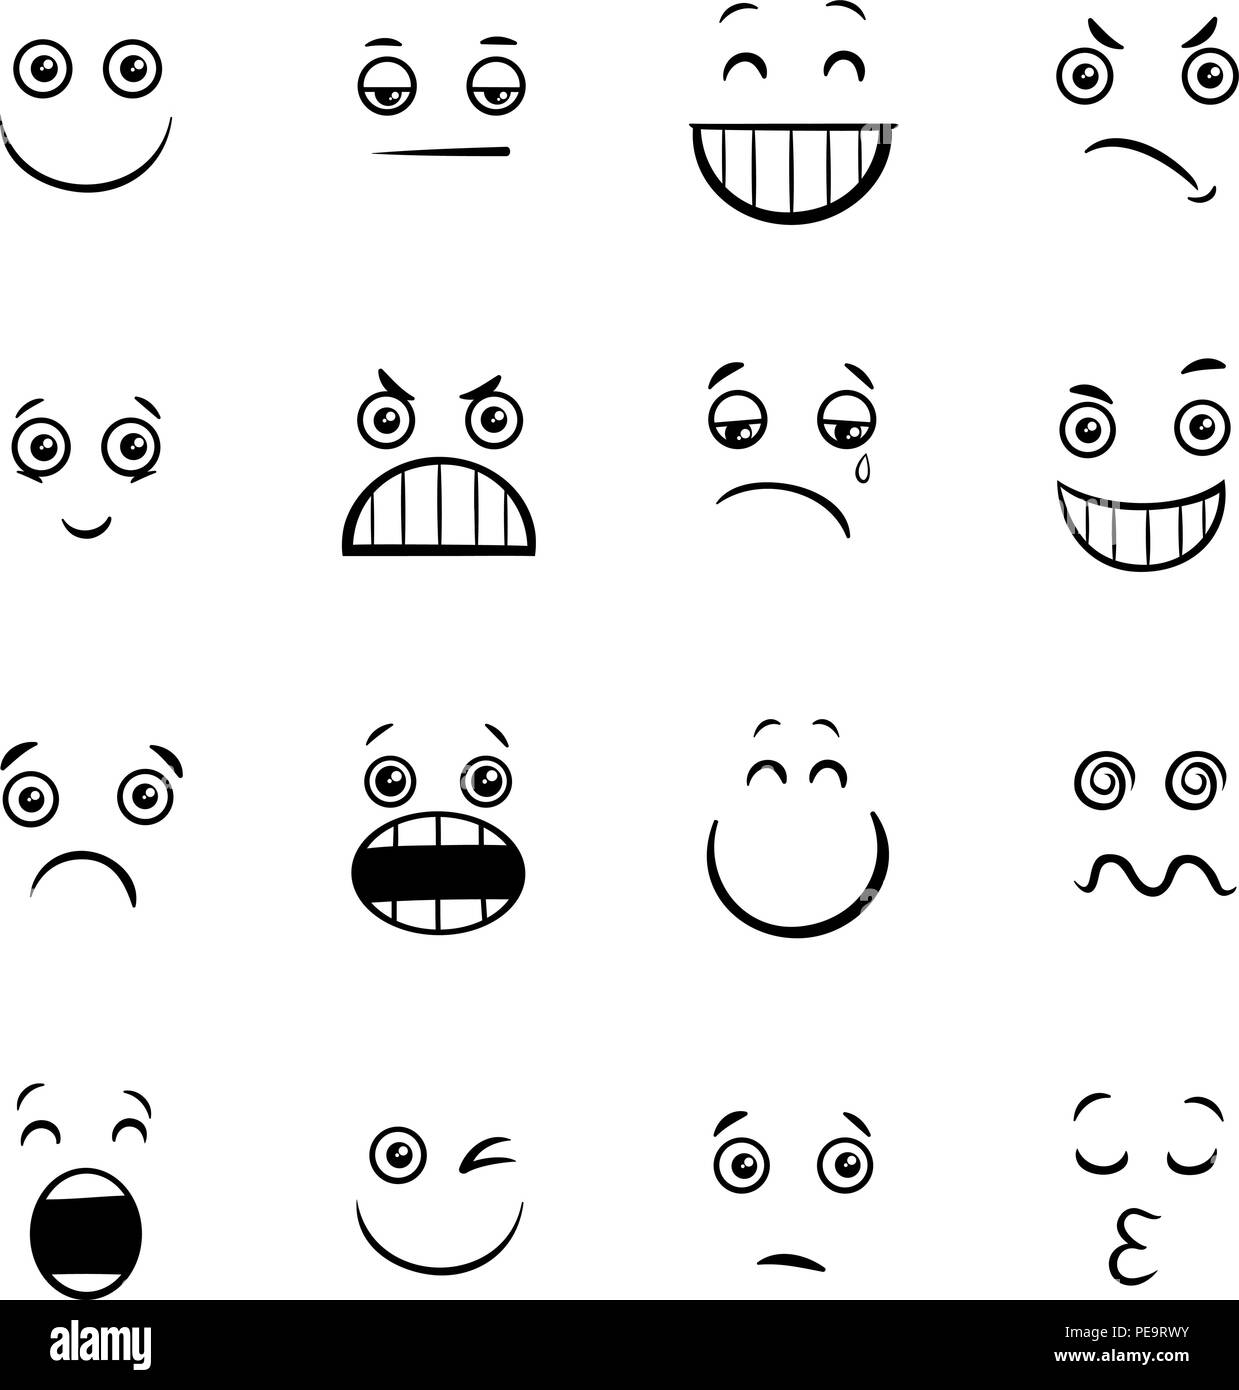 Black and White Cartoon Illustration of Emoticon or Emotions Facial Expression Icons Set Stock Vector